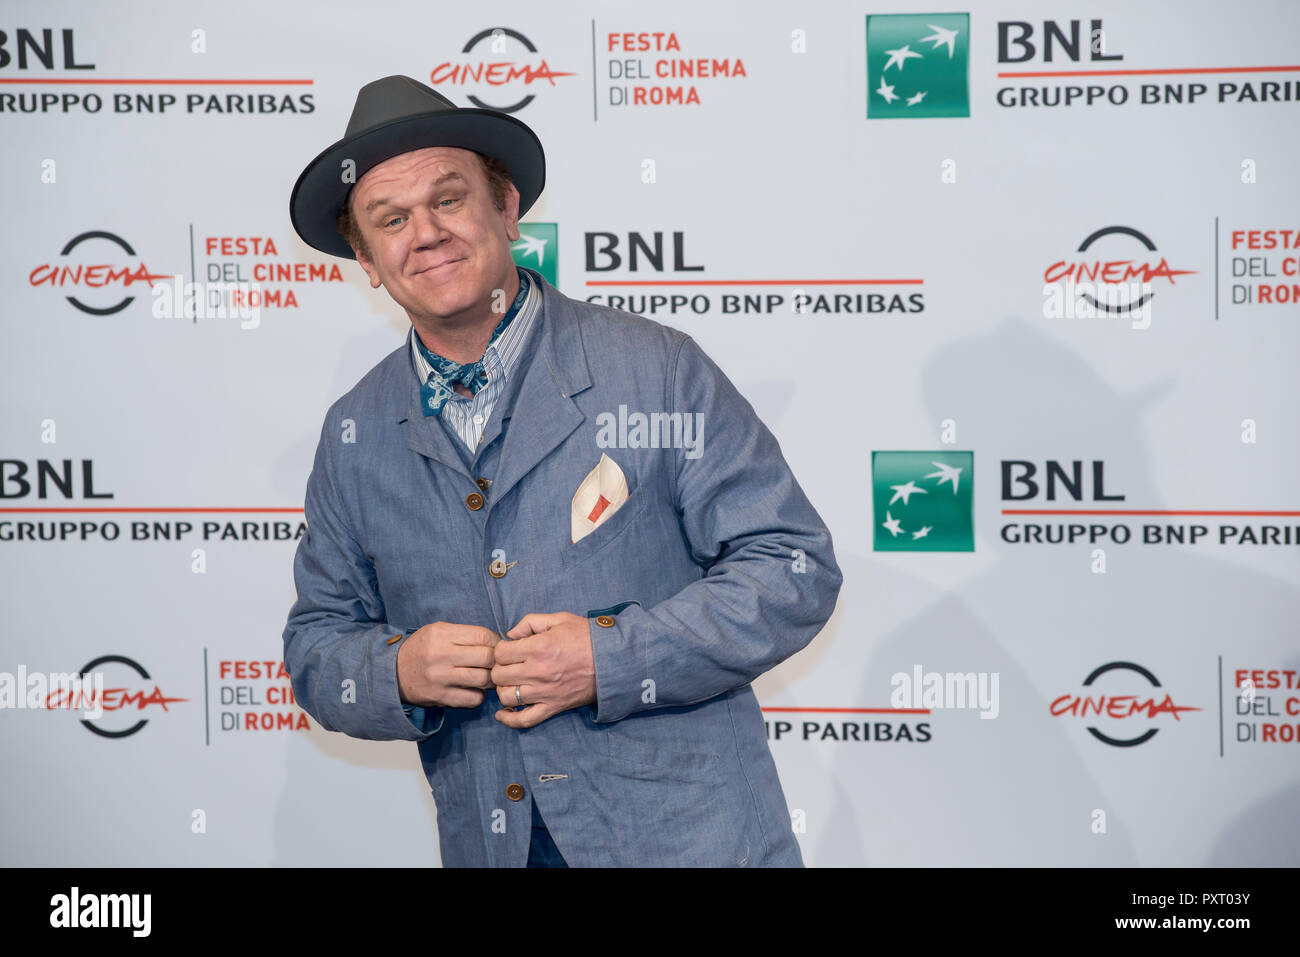 Rome, Italy. 24th Oct 2018. John C. Reilly attending the photocall of Stan & Ollie at Rome Film Fest 2018 Credit: Silvia Gerbino/Alamy Live News Credit: Silvia Gerbino/Alamy Live News Stock Photo